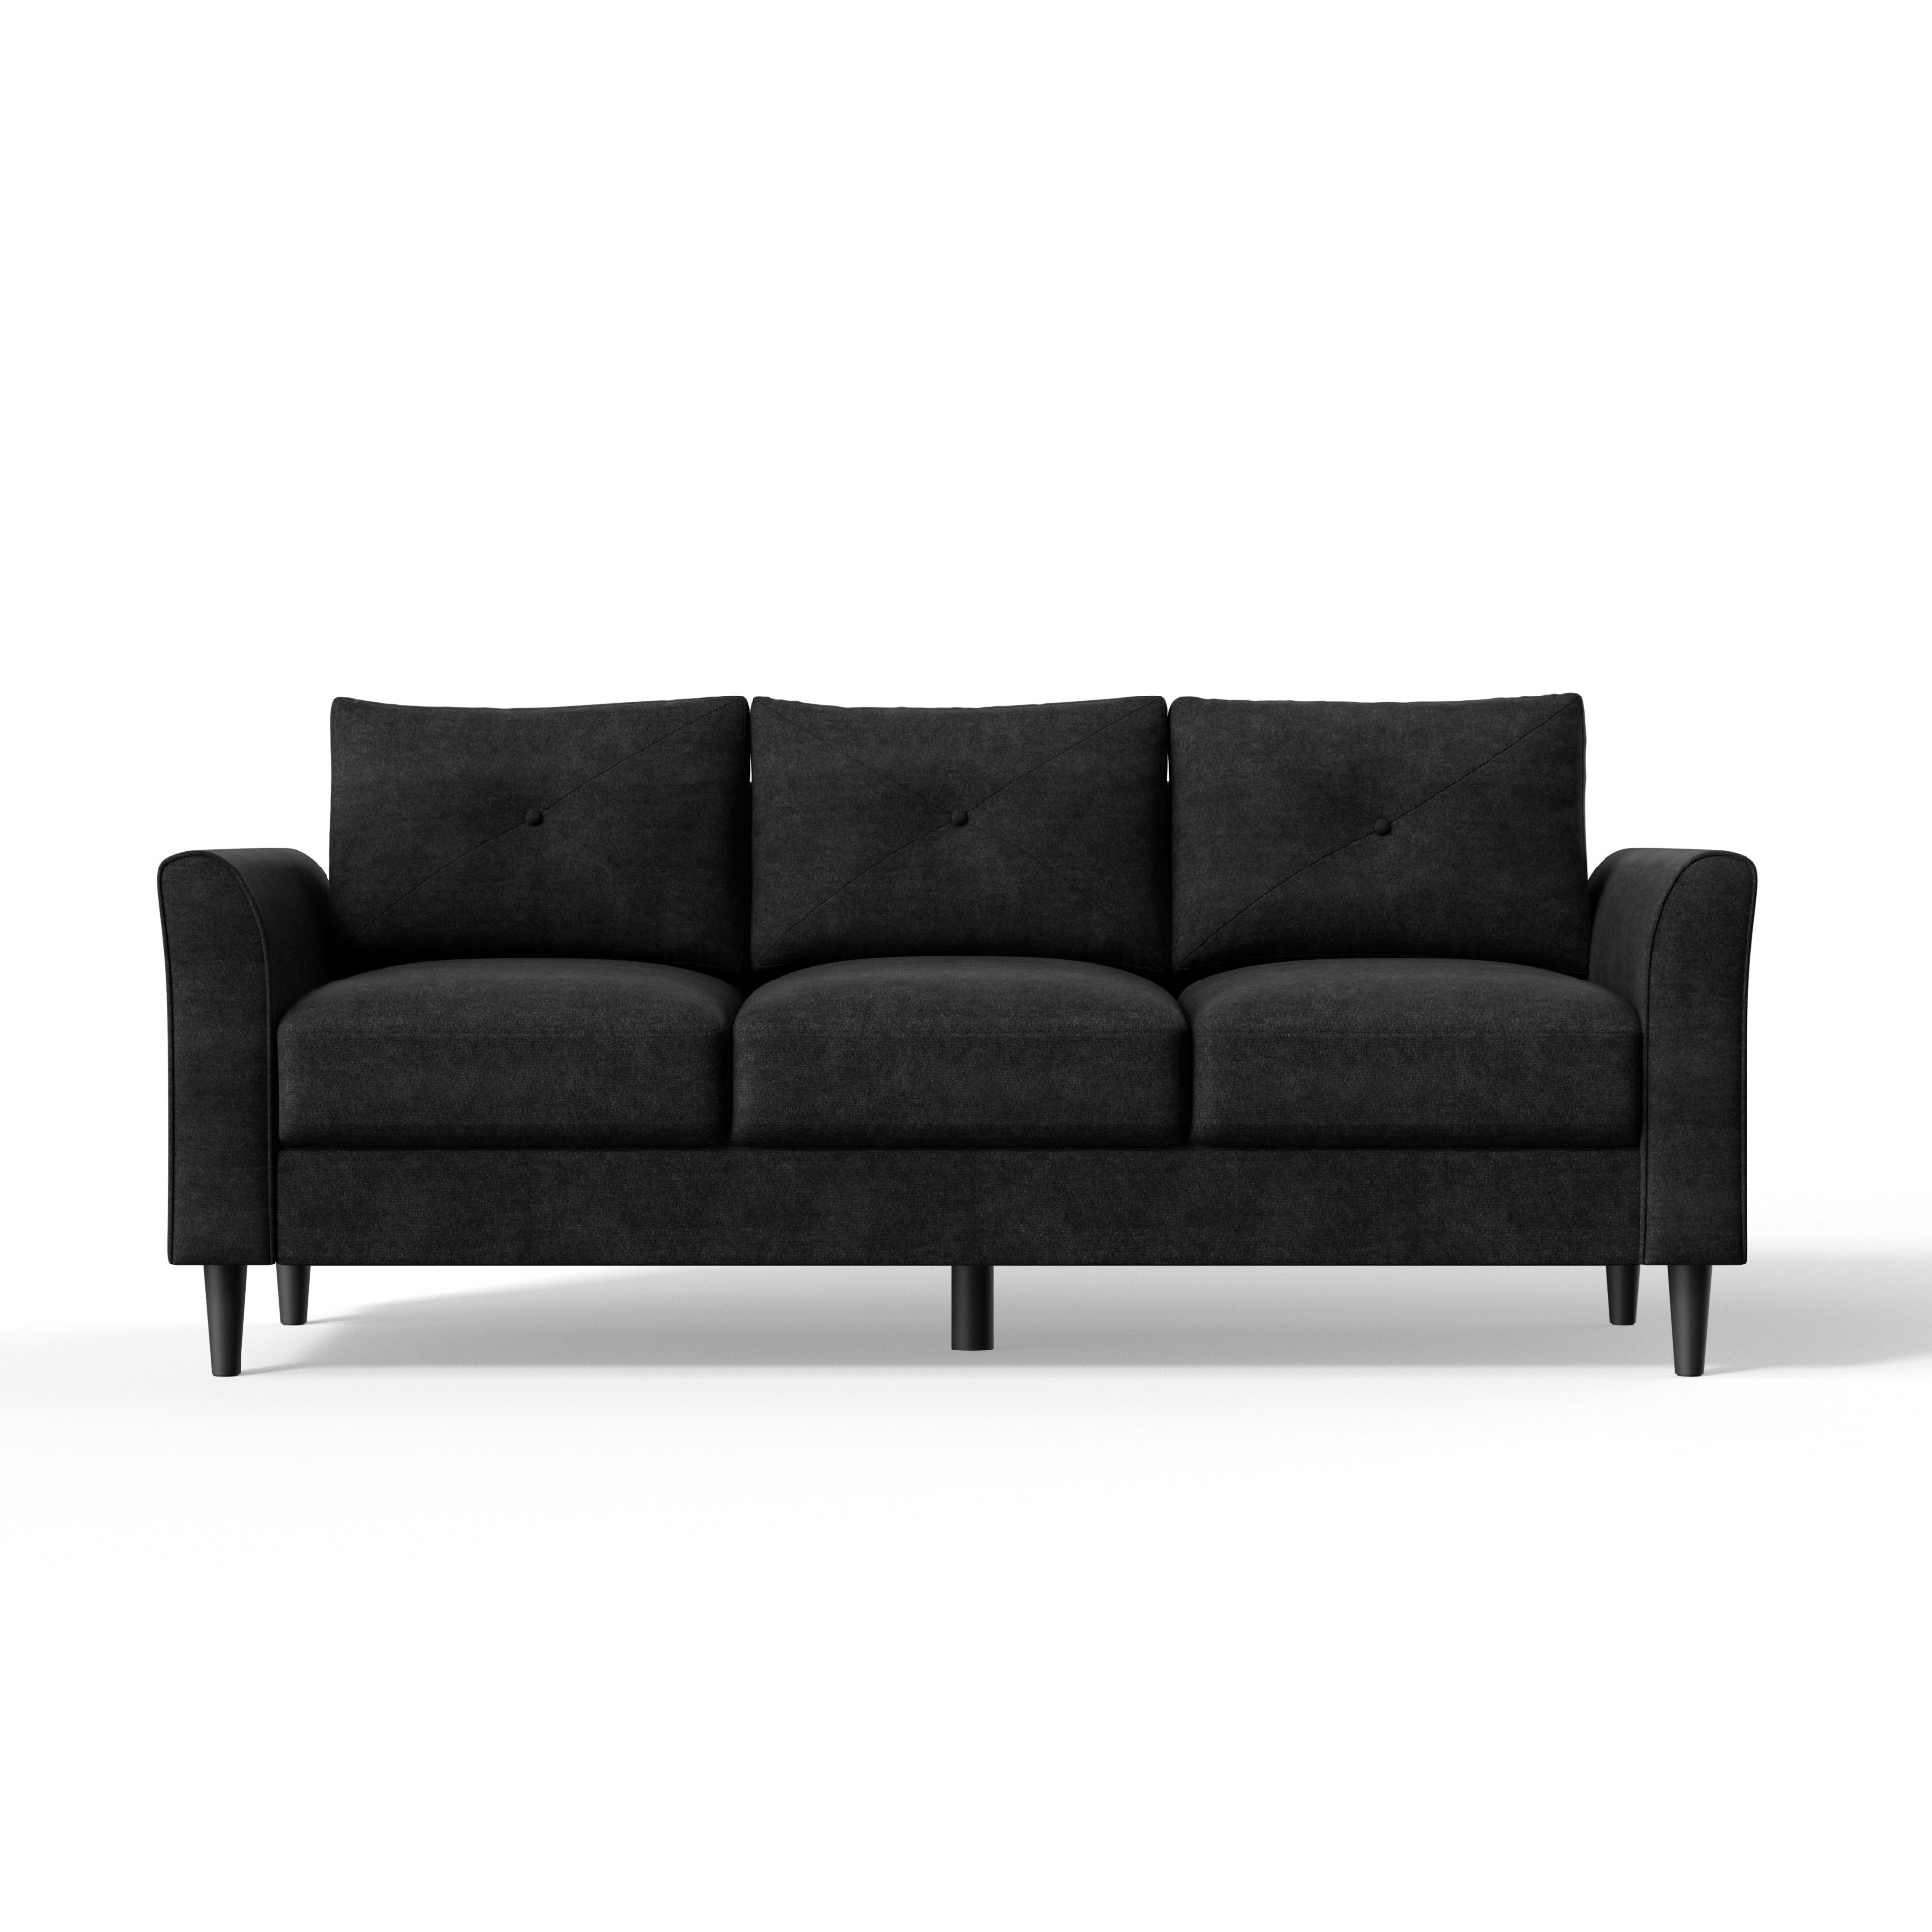 black 3 seater sofa with button tufting silo shot